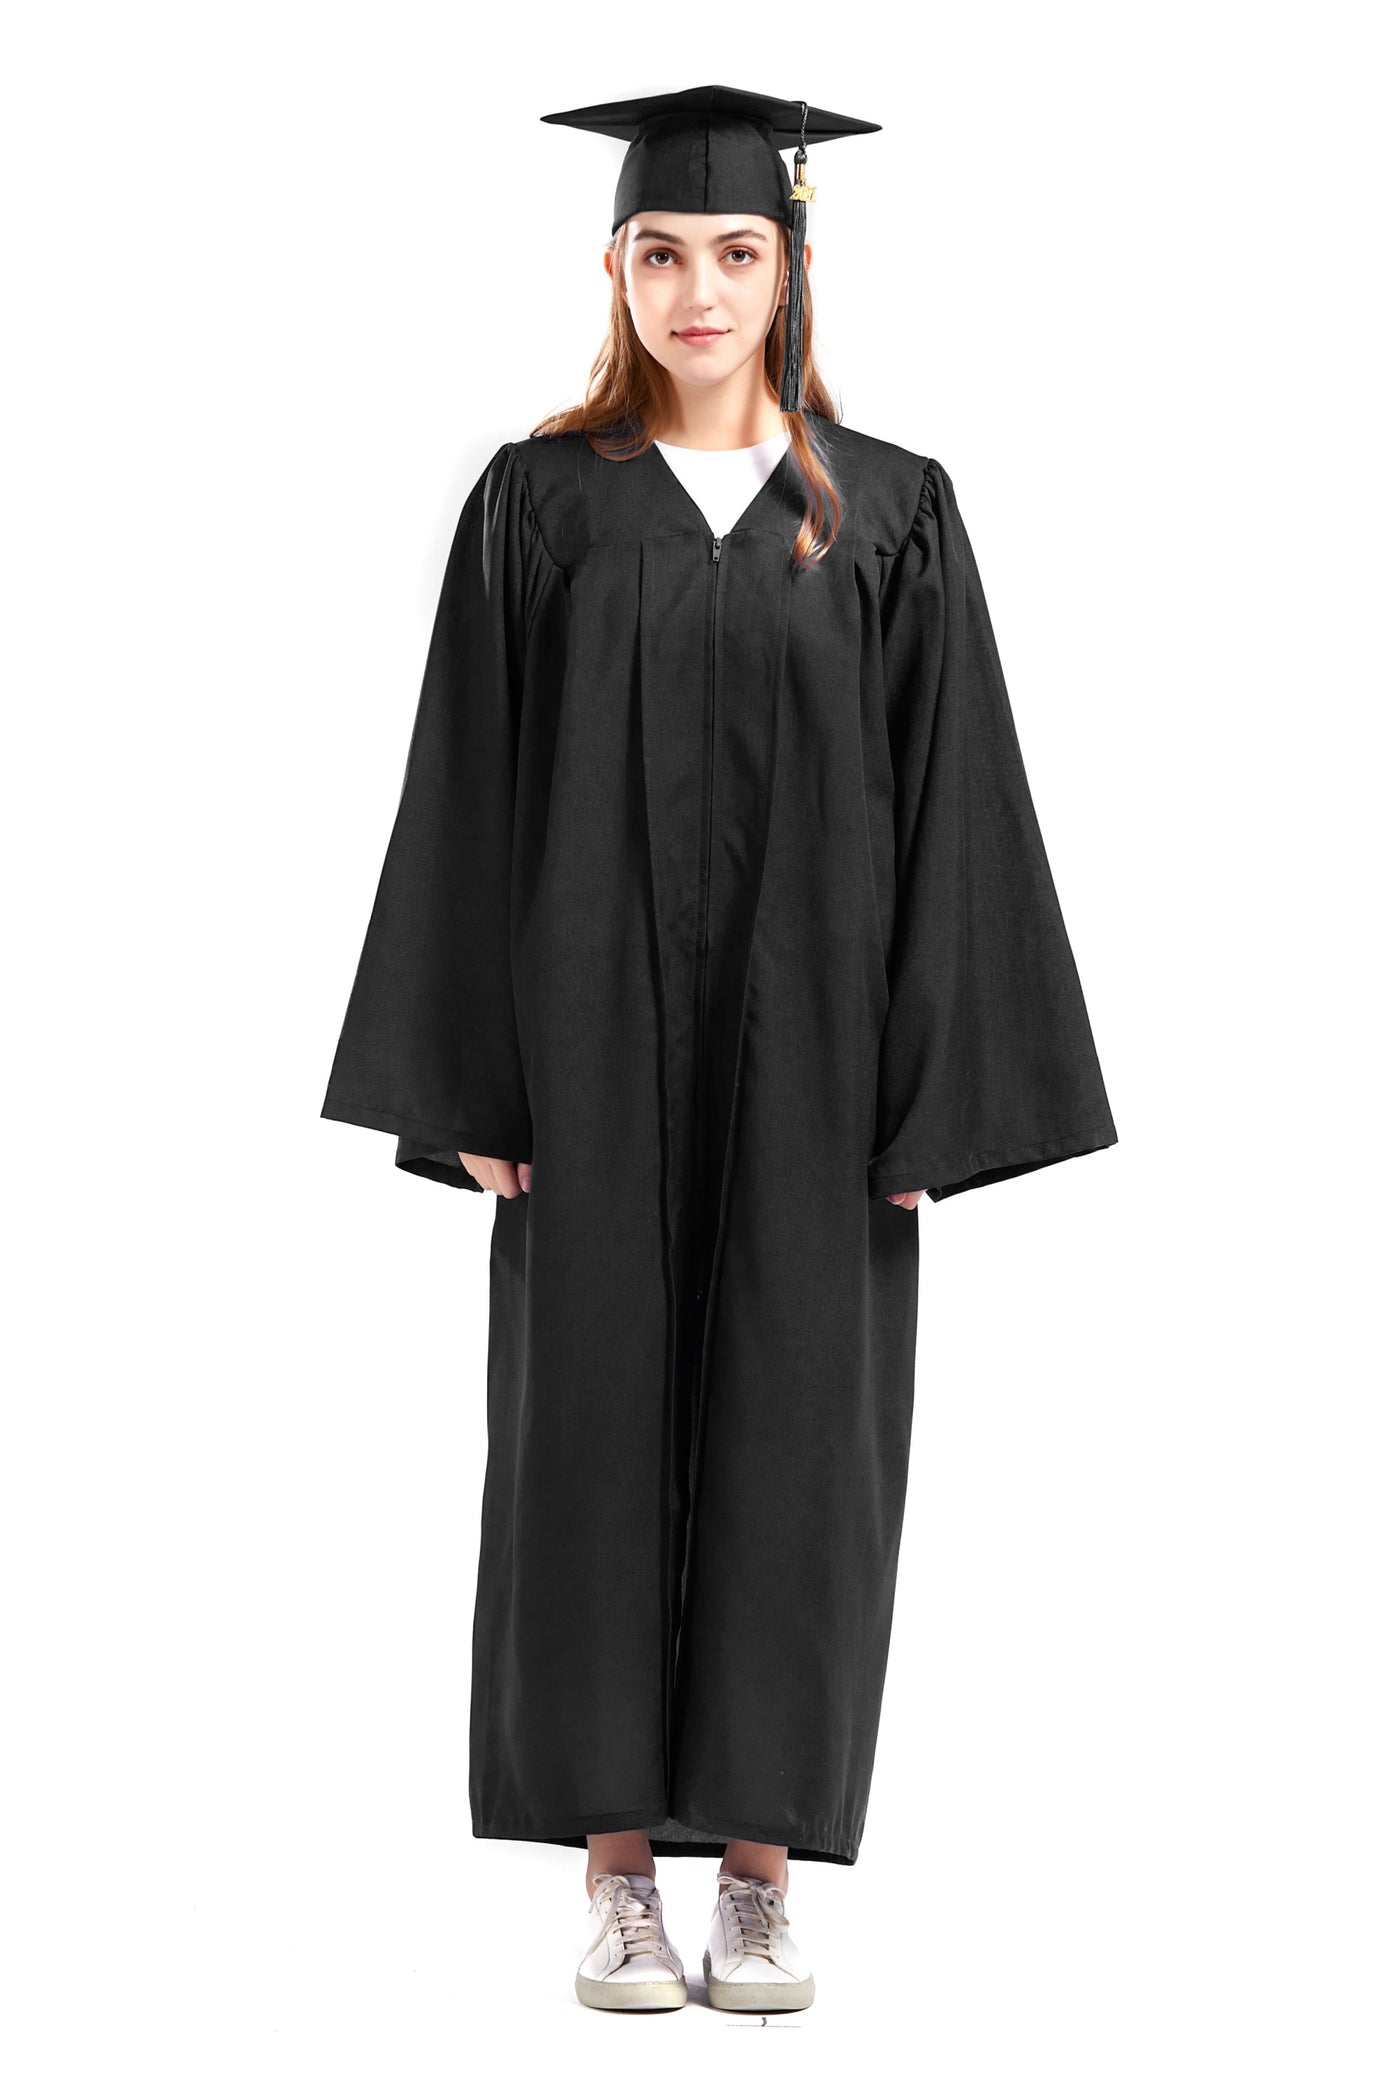 Graduation Cap Gown 2023 & 2022 Year Charm for College or High School Graduates